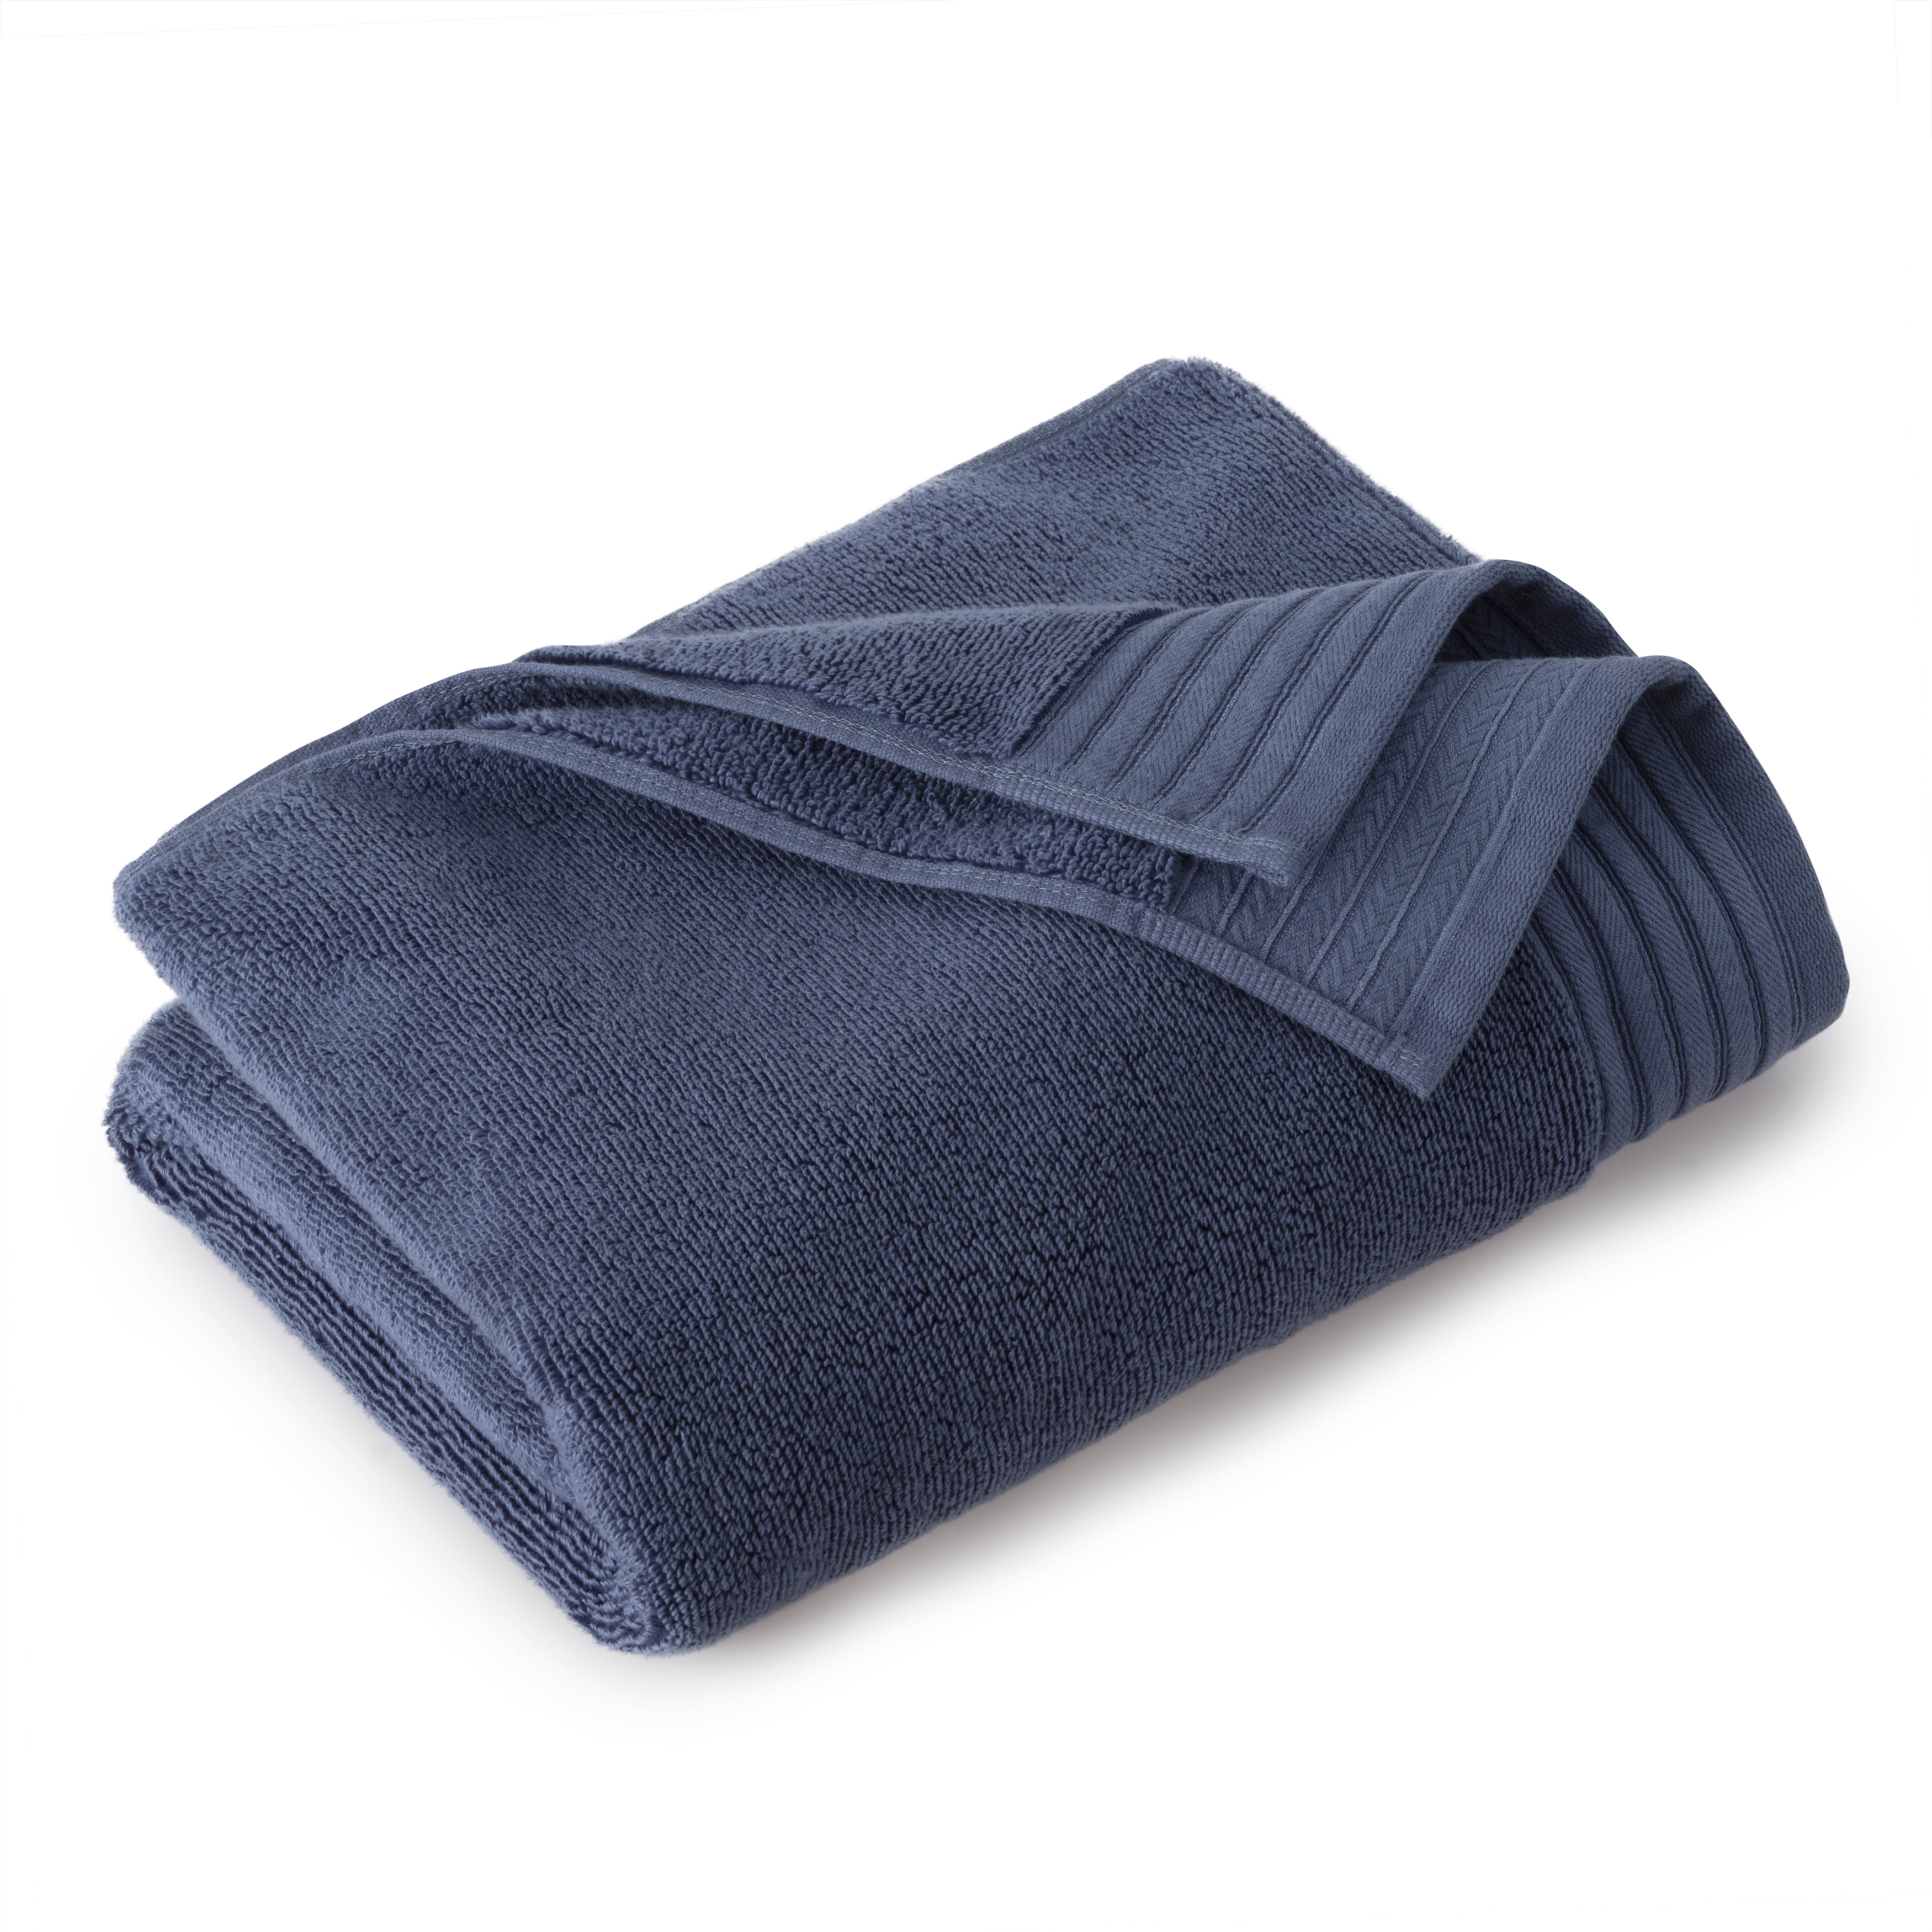 Havly | The Classic Bath Towel in Zissou Blue